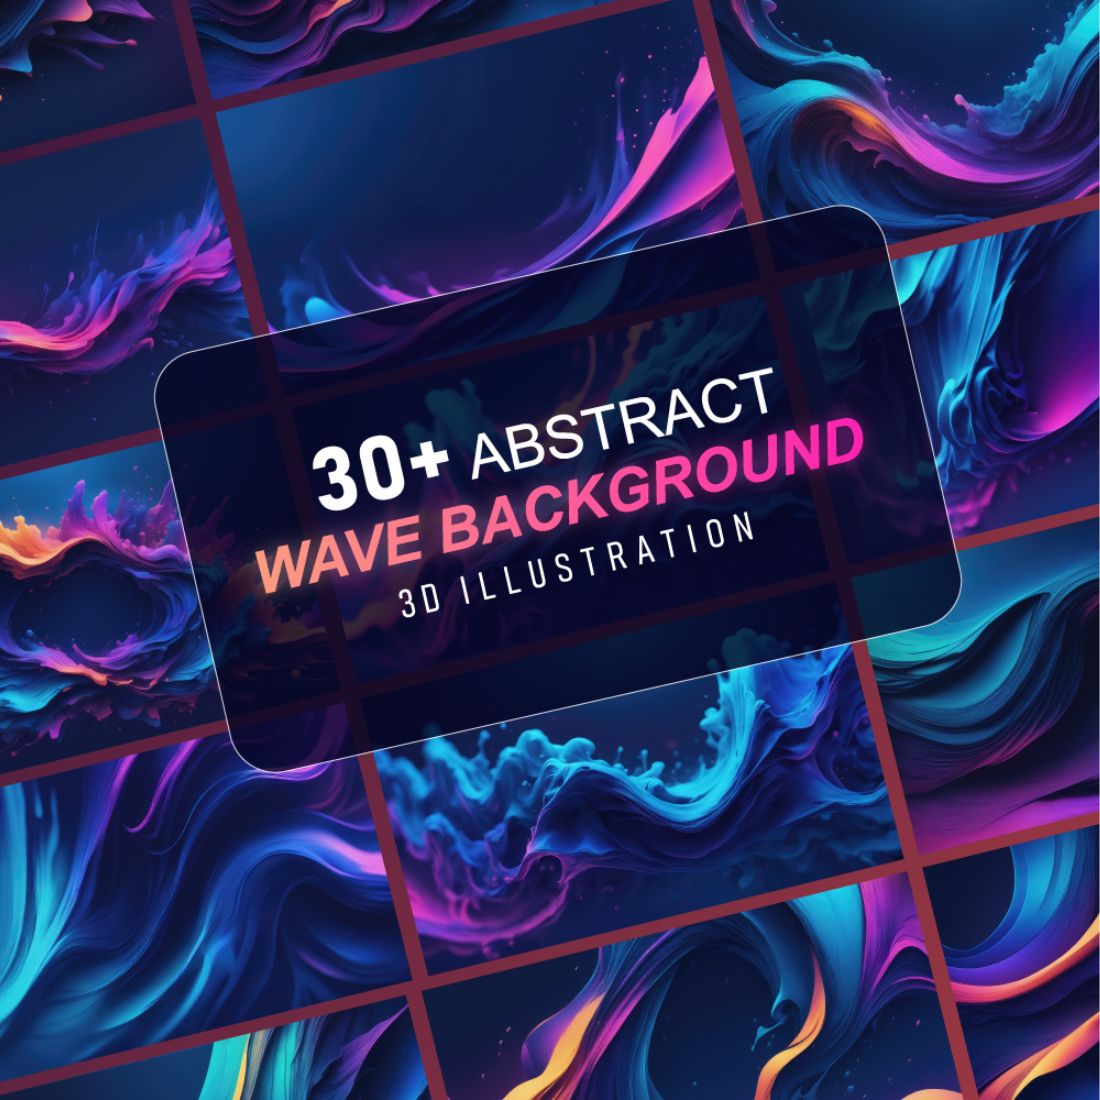 30+ Abstract wave background illustration set preview image.